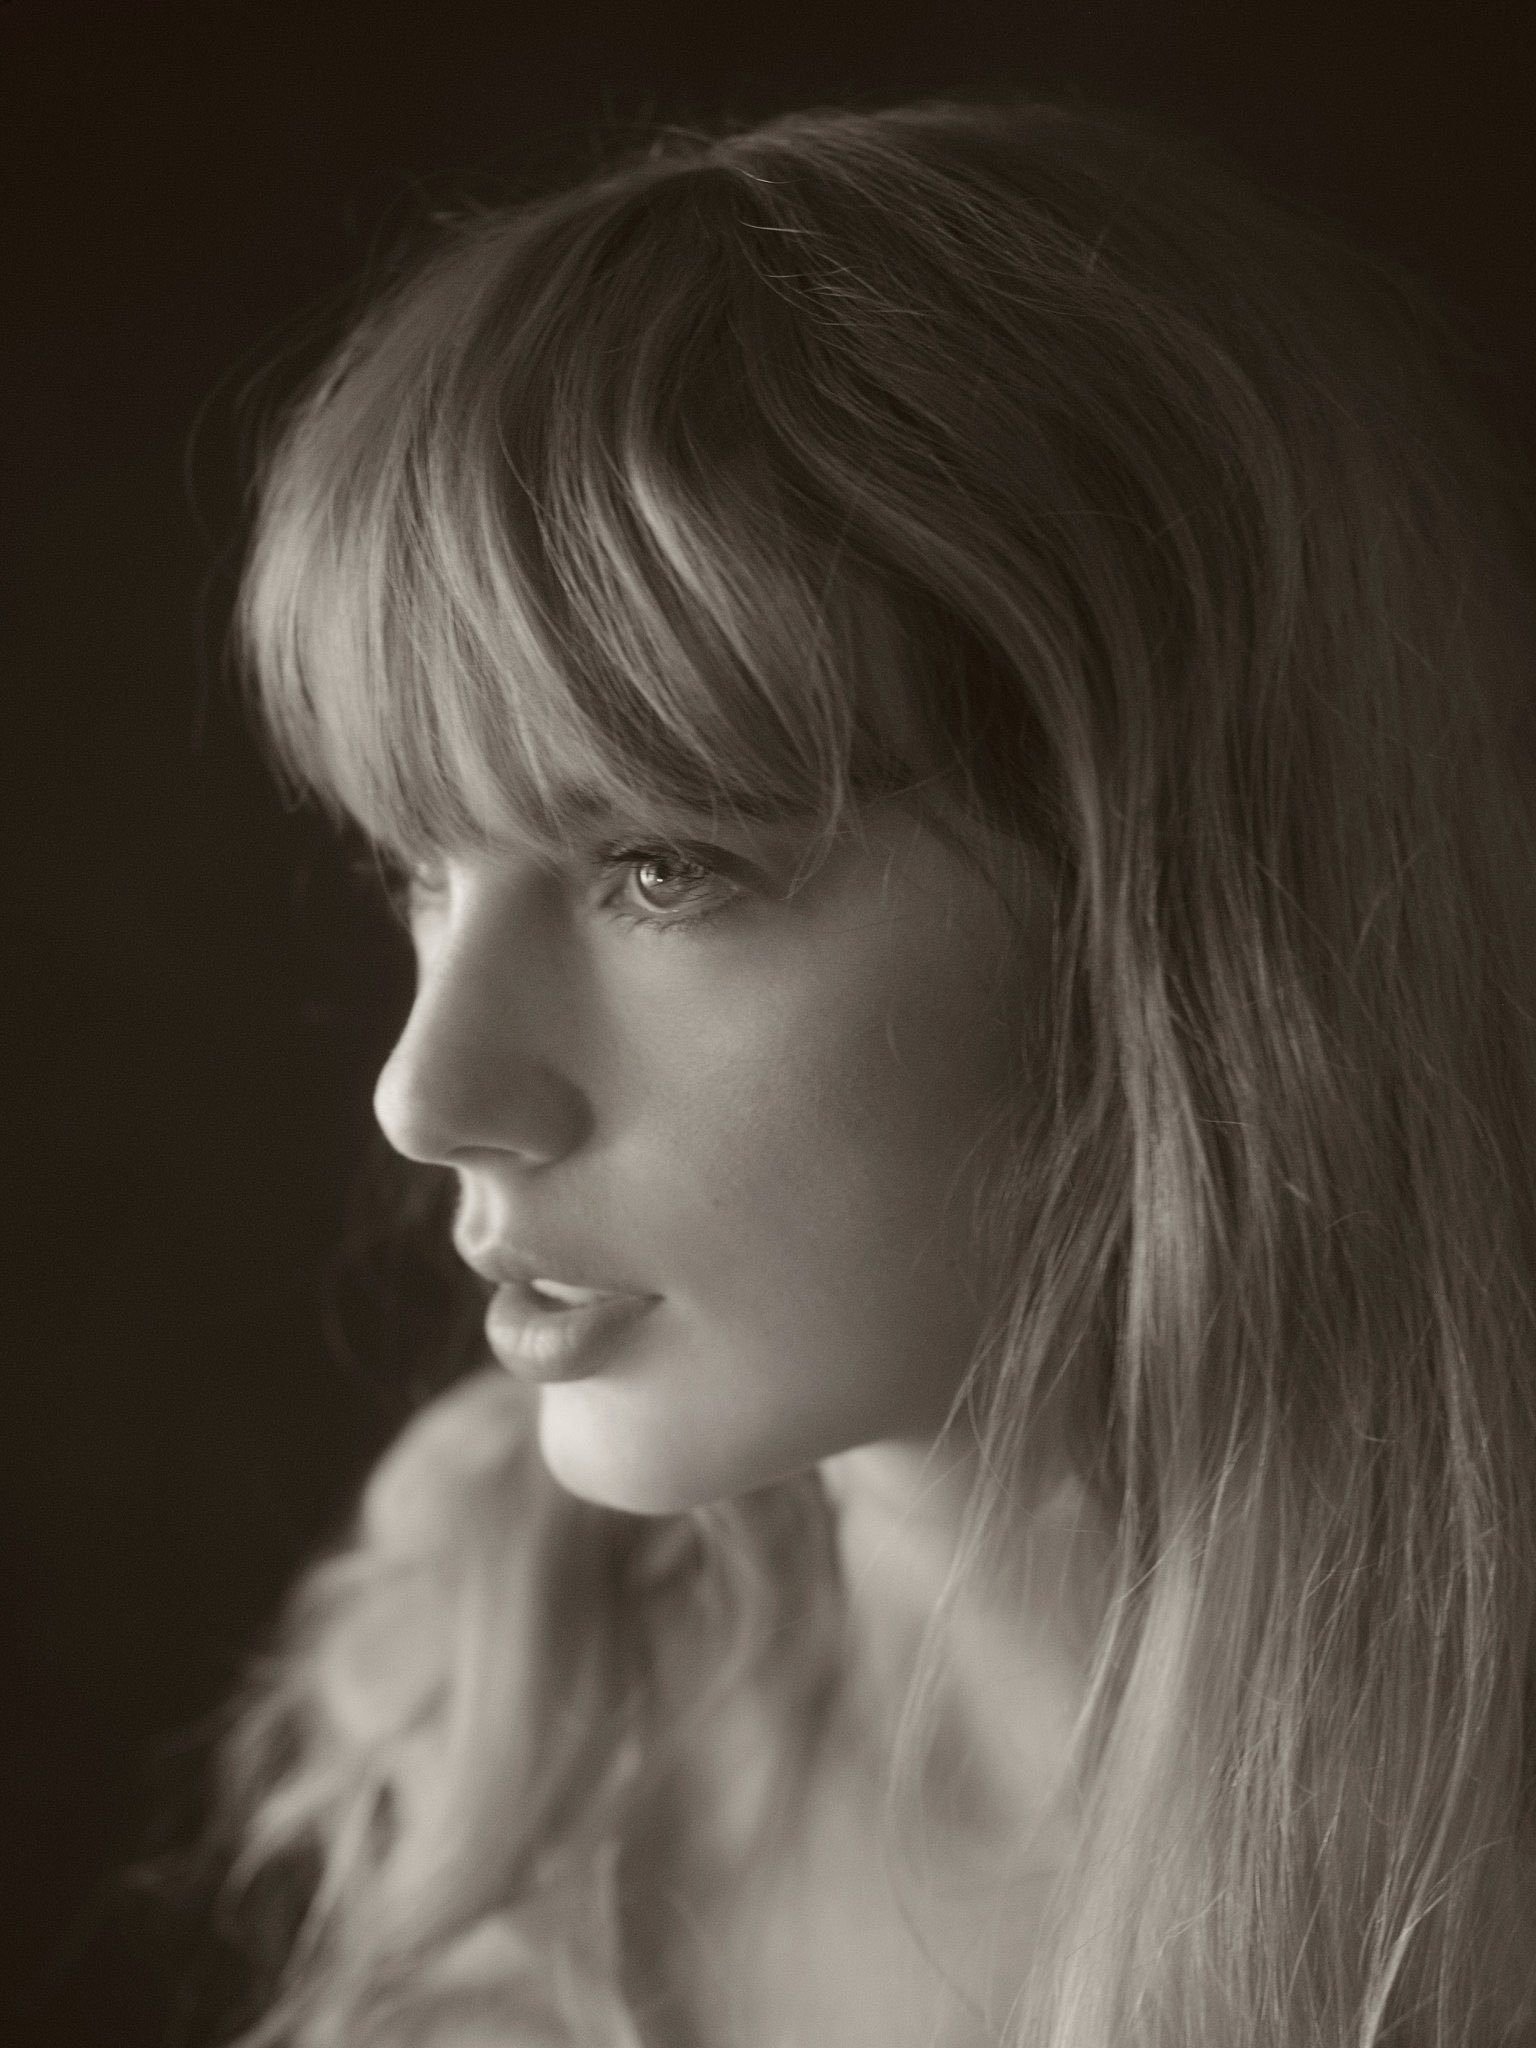 Taylor Swift Charts on X: "Critics are praising Taylor Swift for blending  genres and exploring new sonic territories with “The Tortured Poets  Department”, rather than relying on past formulas and prioritizing  commercial